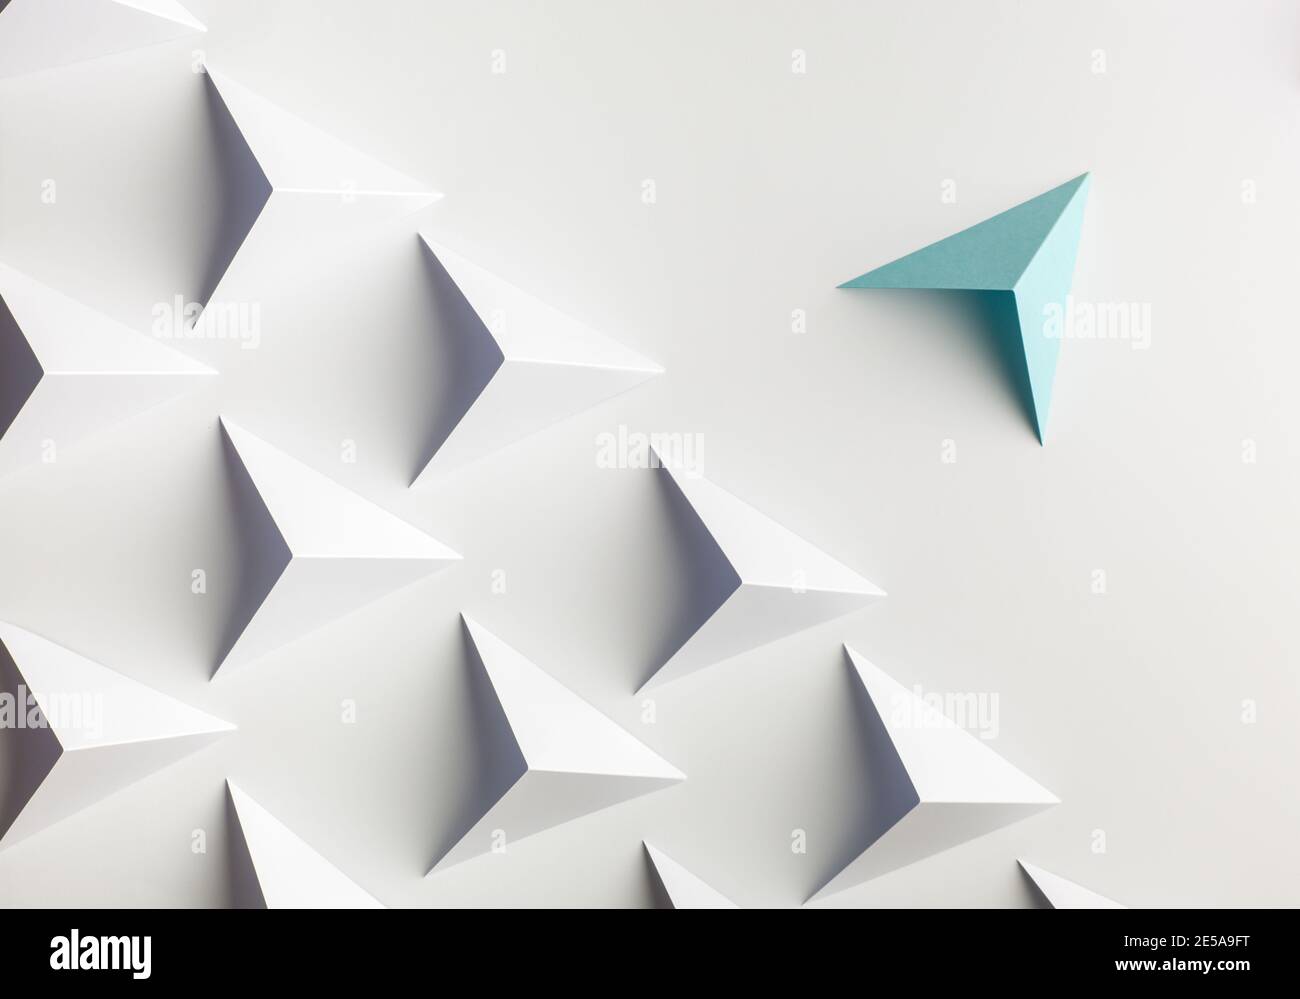 abstract tetrahedron background. copy space available. useful for business cards and web Stock Photo